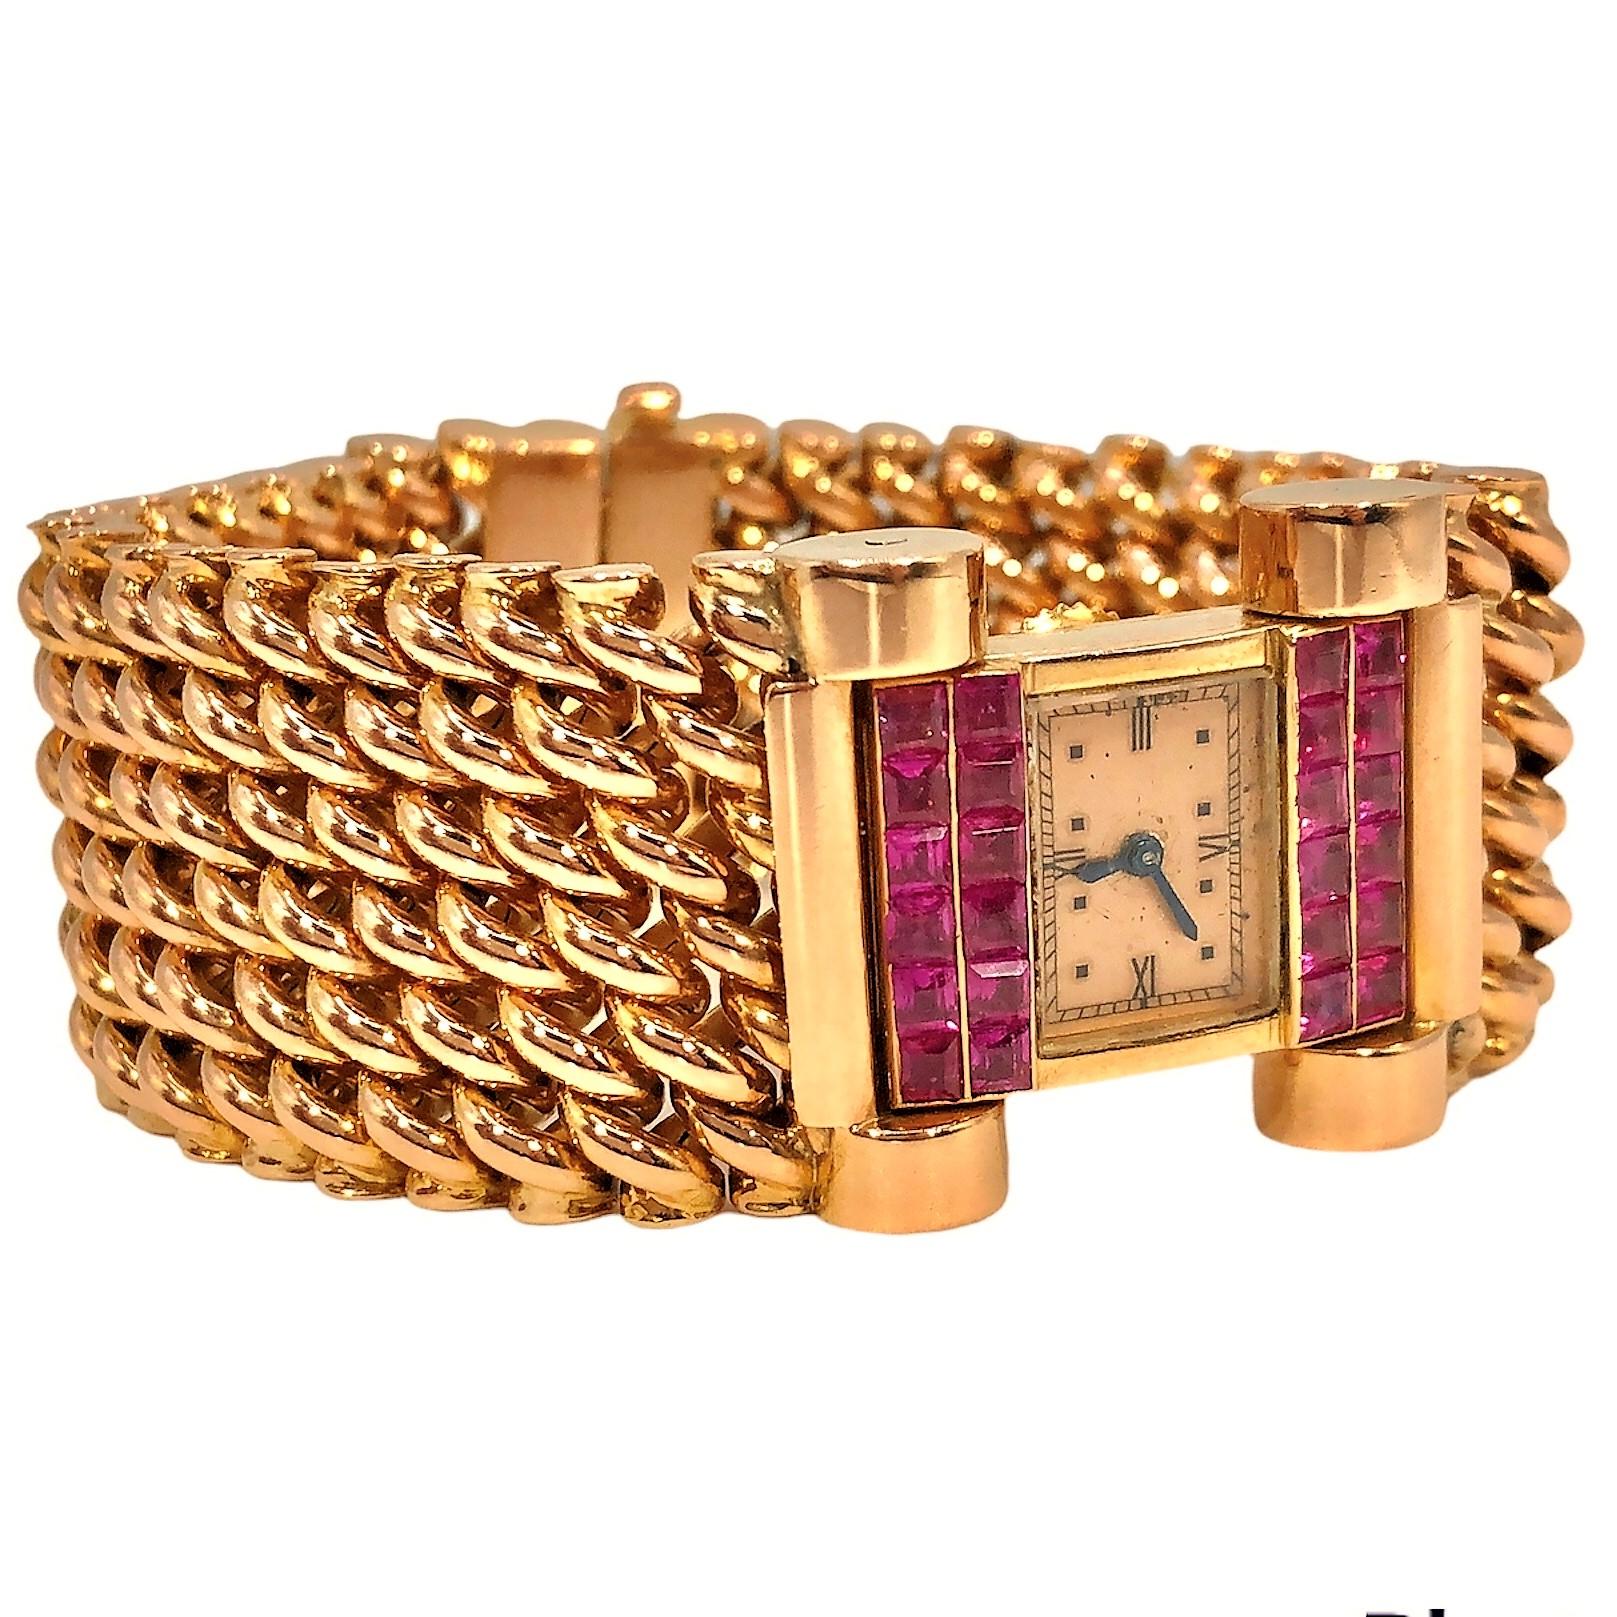 This very interesting Retro period wristwatch is crafted from 18k pink gold and natural square cut rubies. It is powered by a high grade, back wind, Jaeger LeCoultre movement. The rectangular watch head has a beautiful vintage condition pink gold